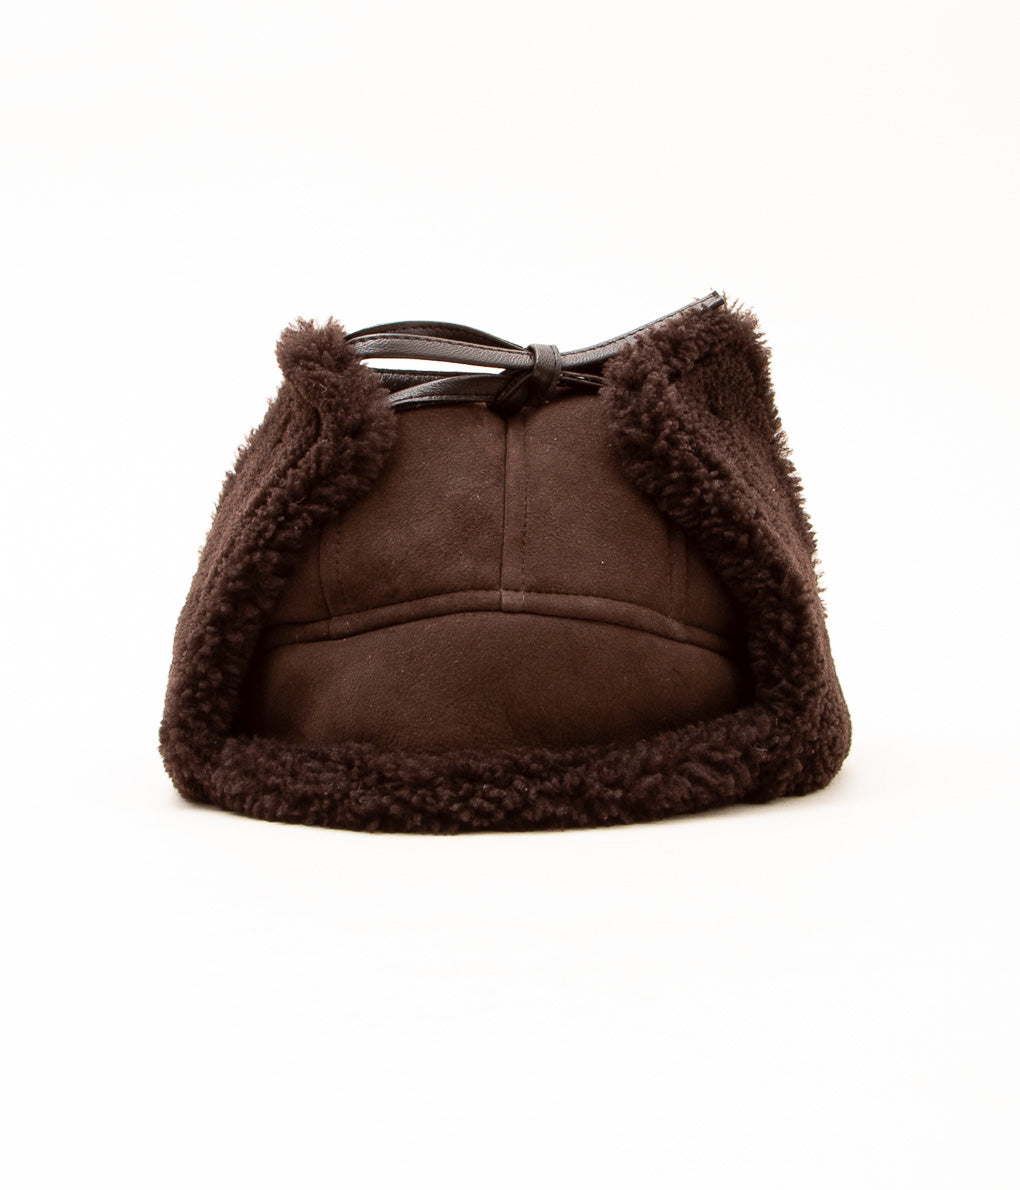 CAWLEY "HEEPSKIN UNISEX TRAPPER HAT WITH LEATHER TIES"(CHOCOLATE SUEDE)